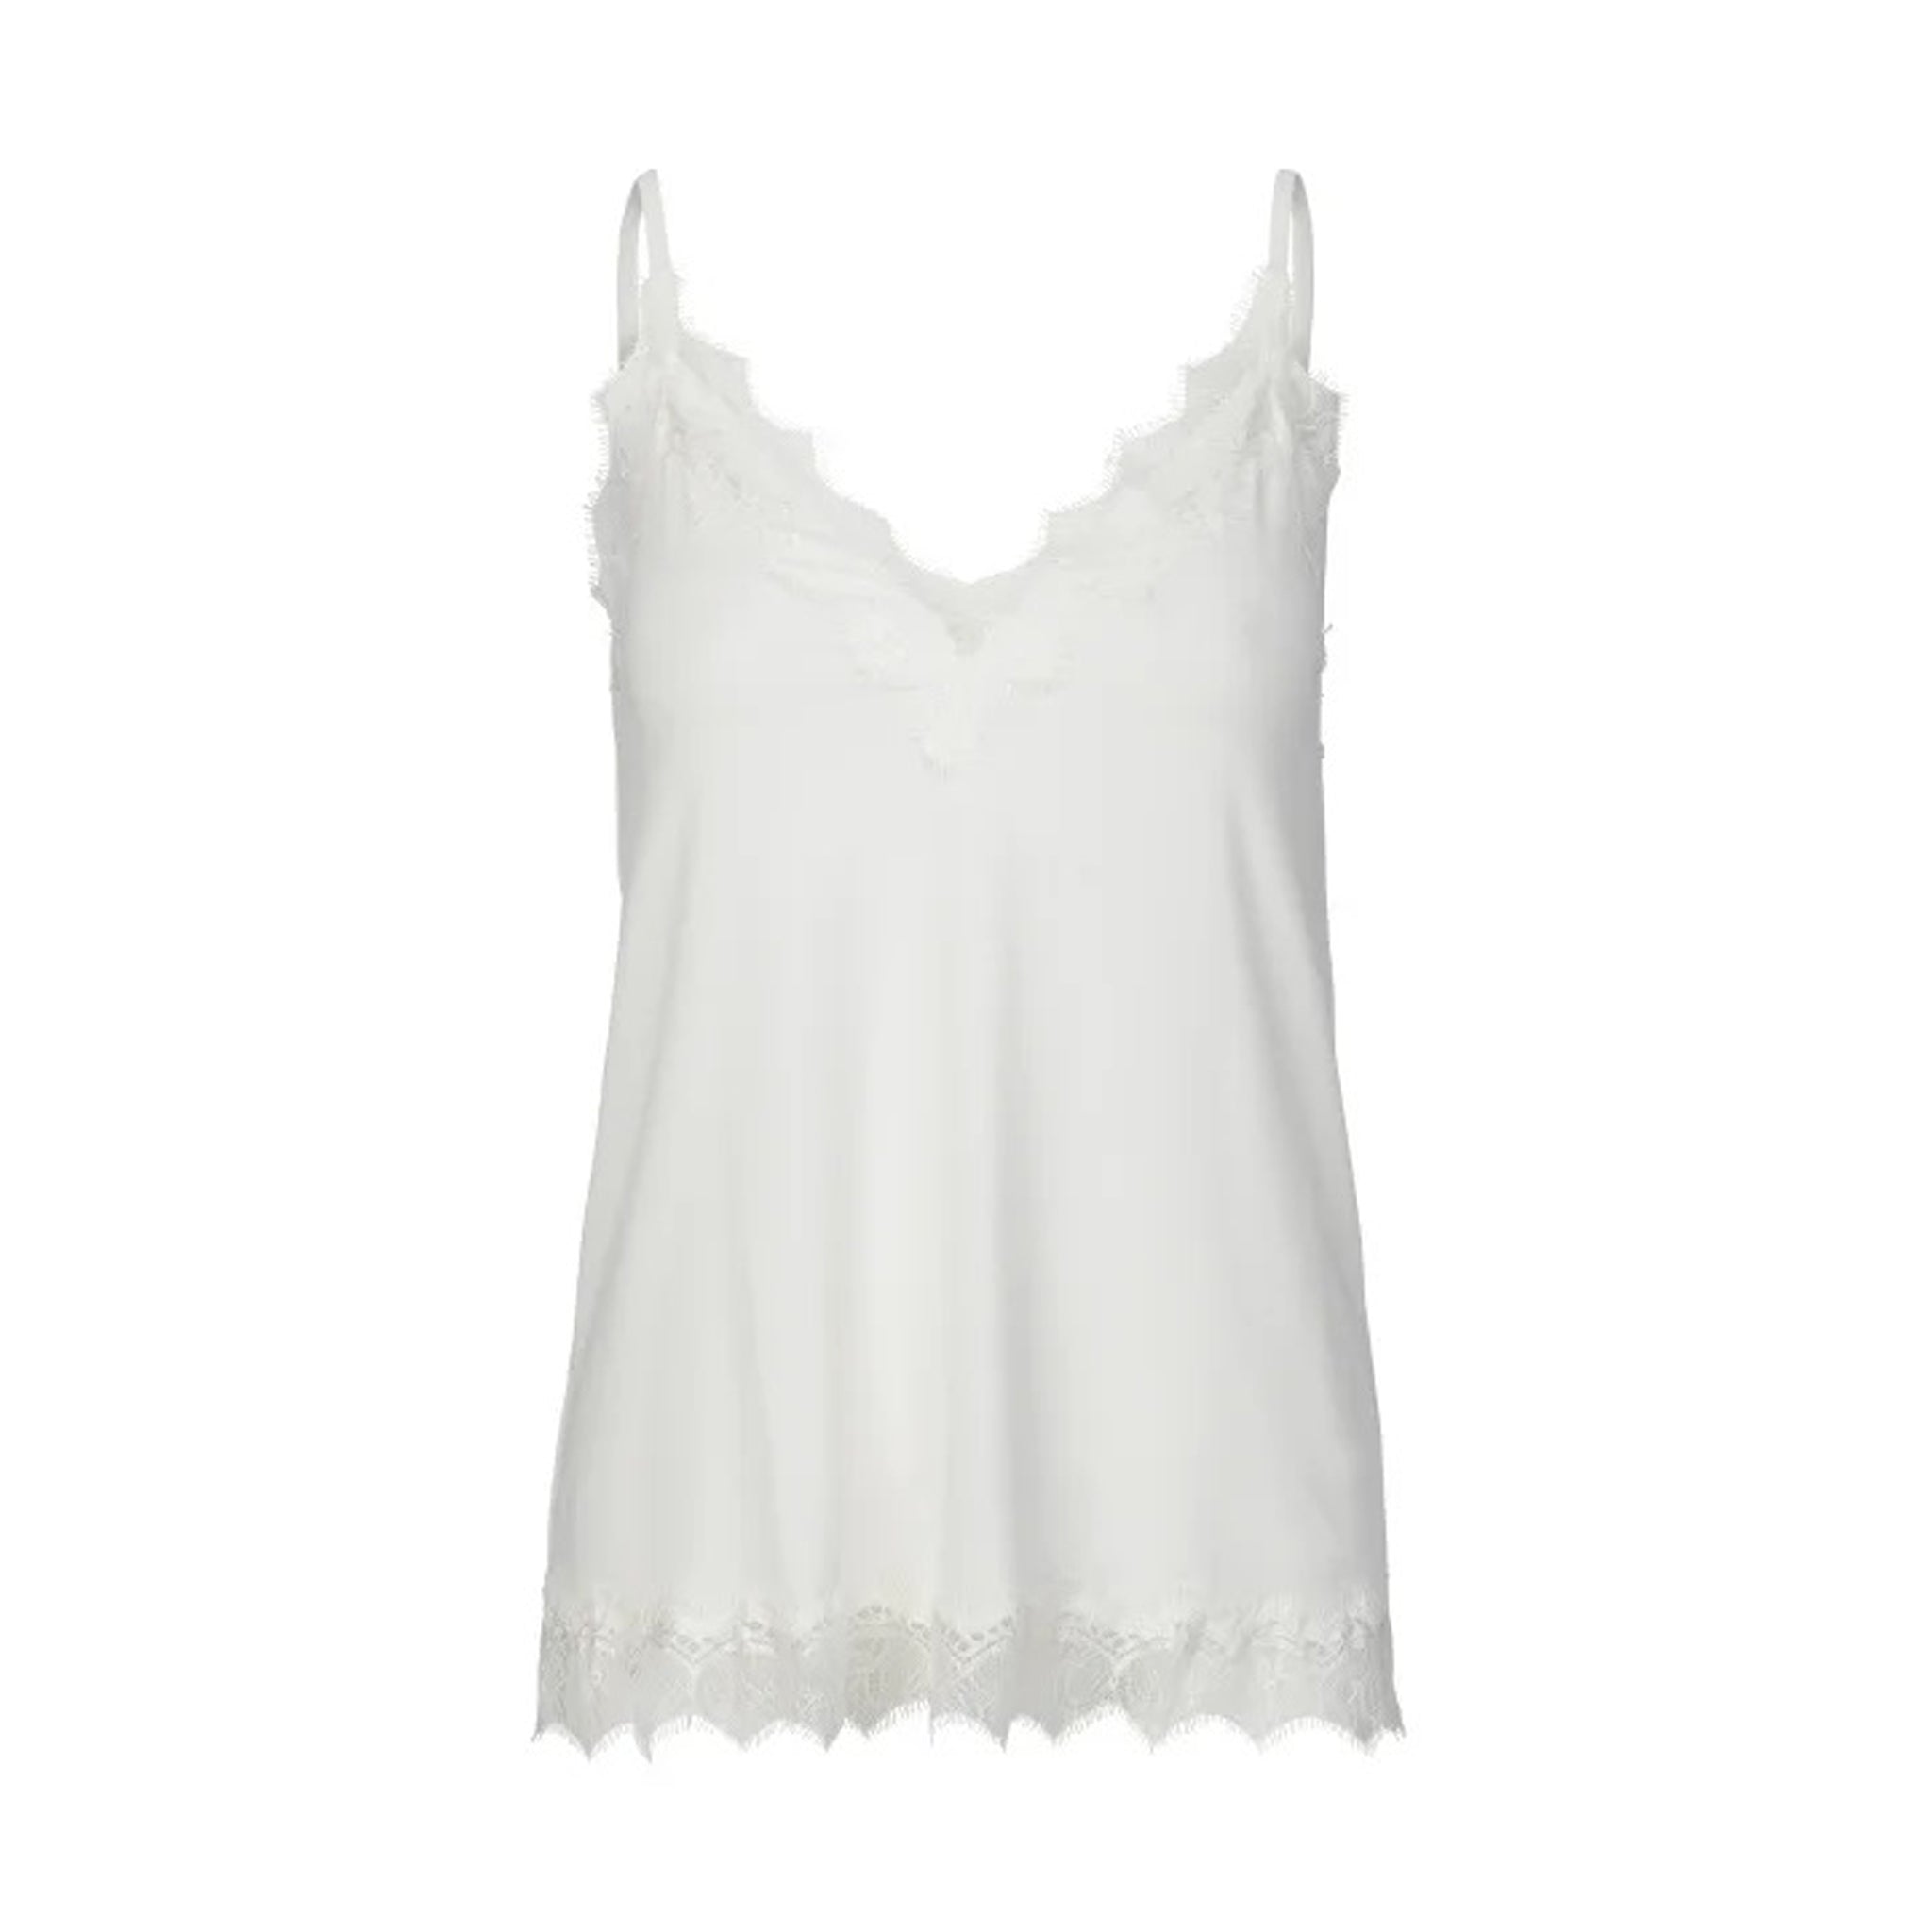 A Rosemunde Strap Lace Top with lace detailing and lightweight fabric.